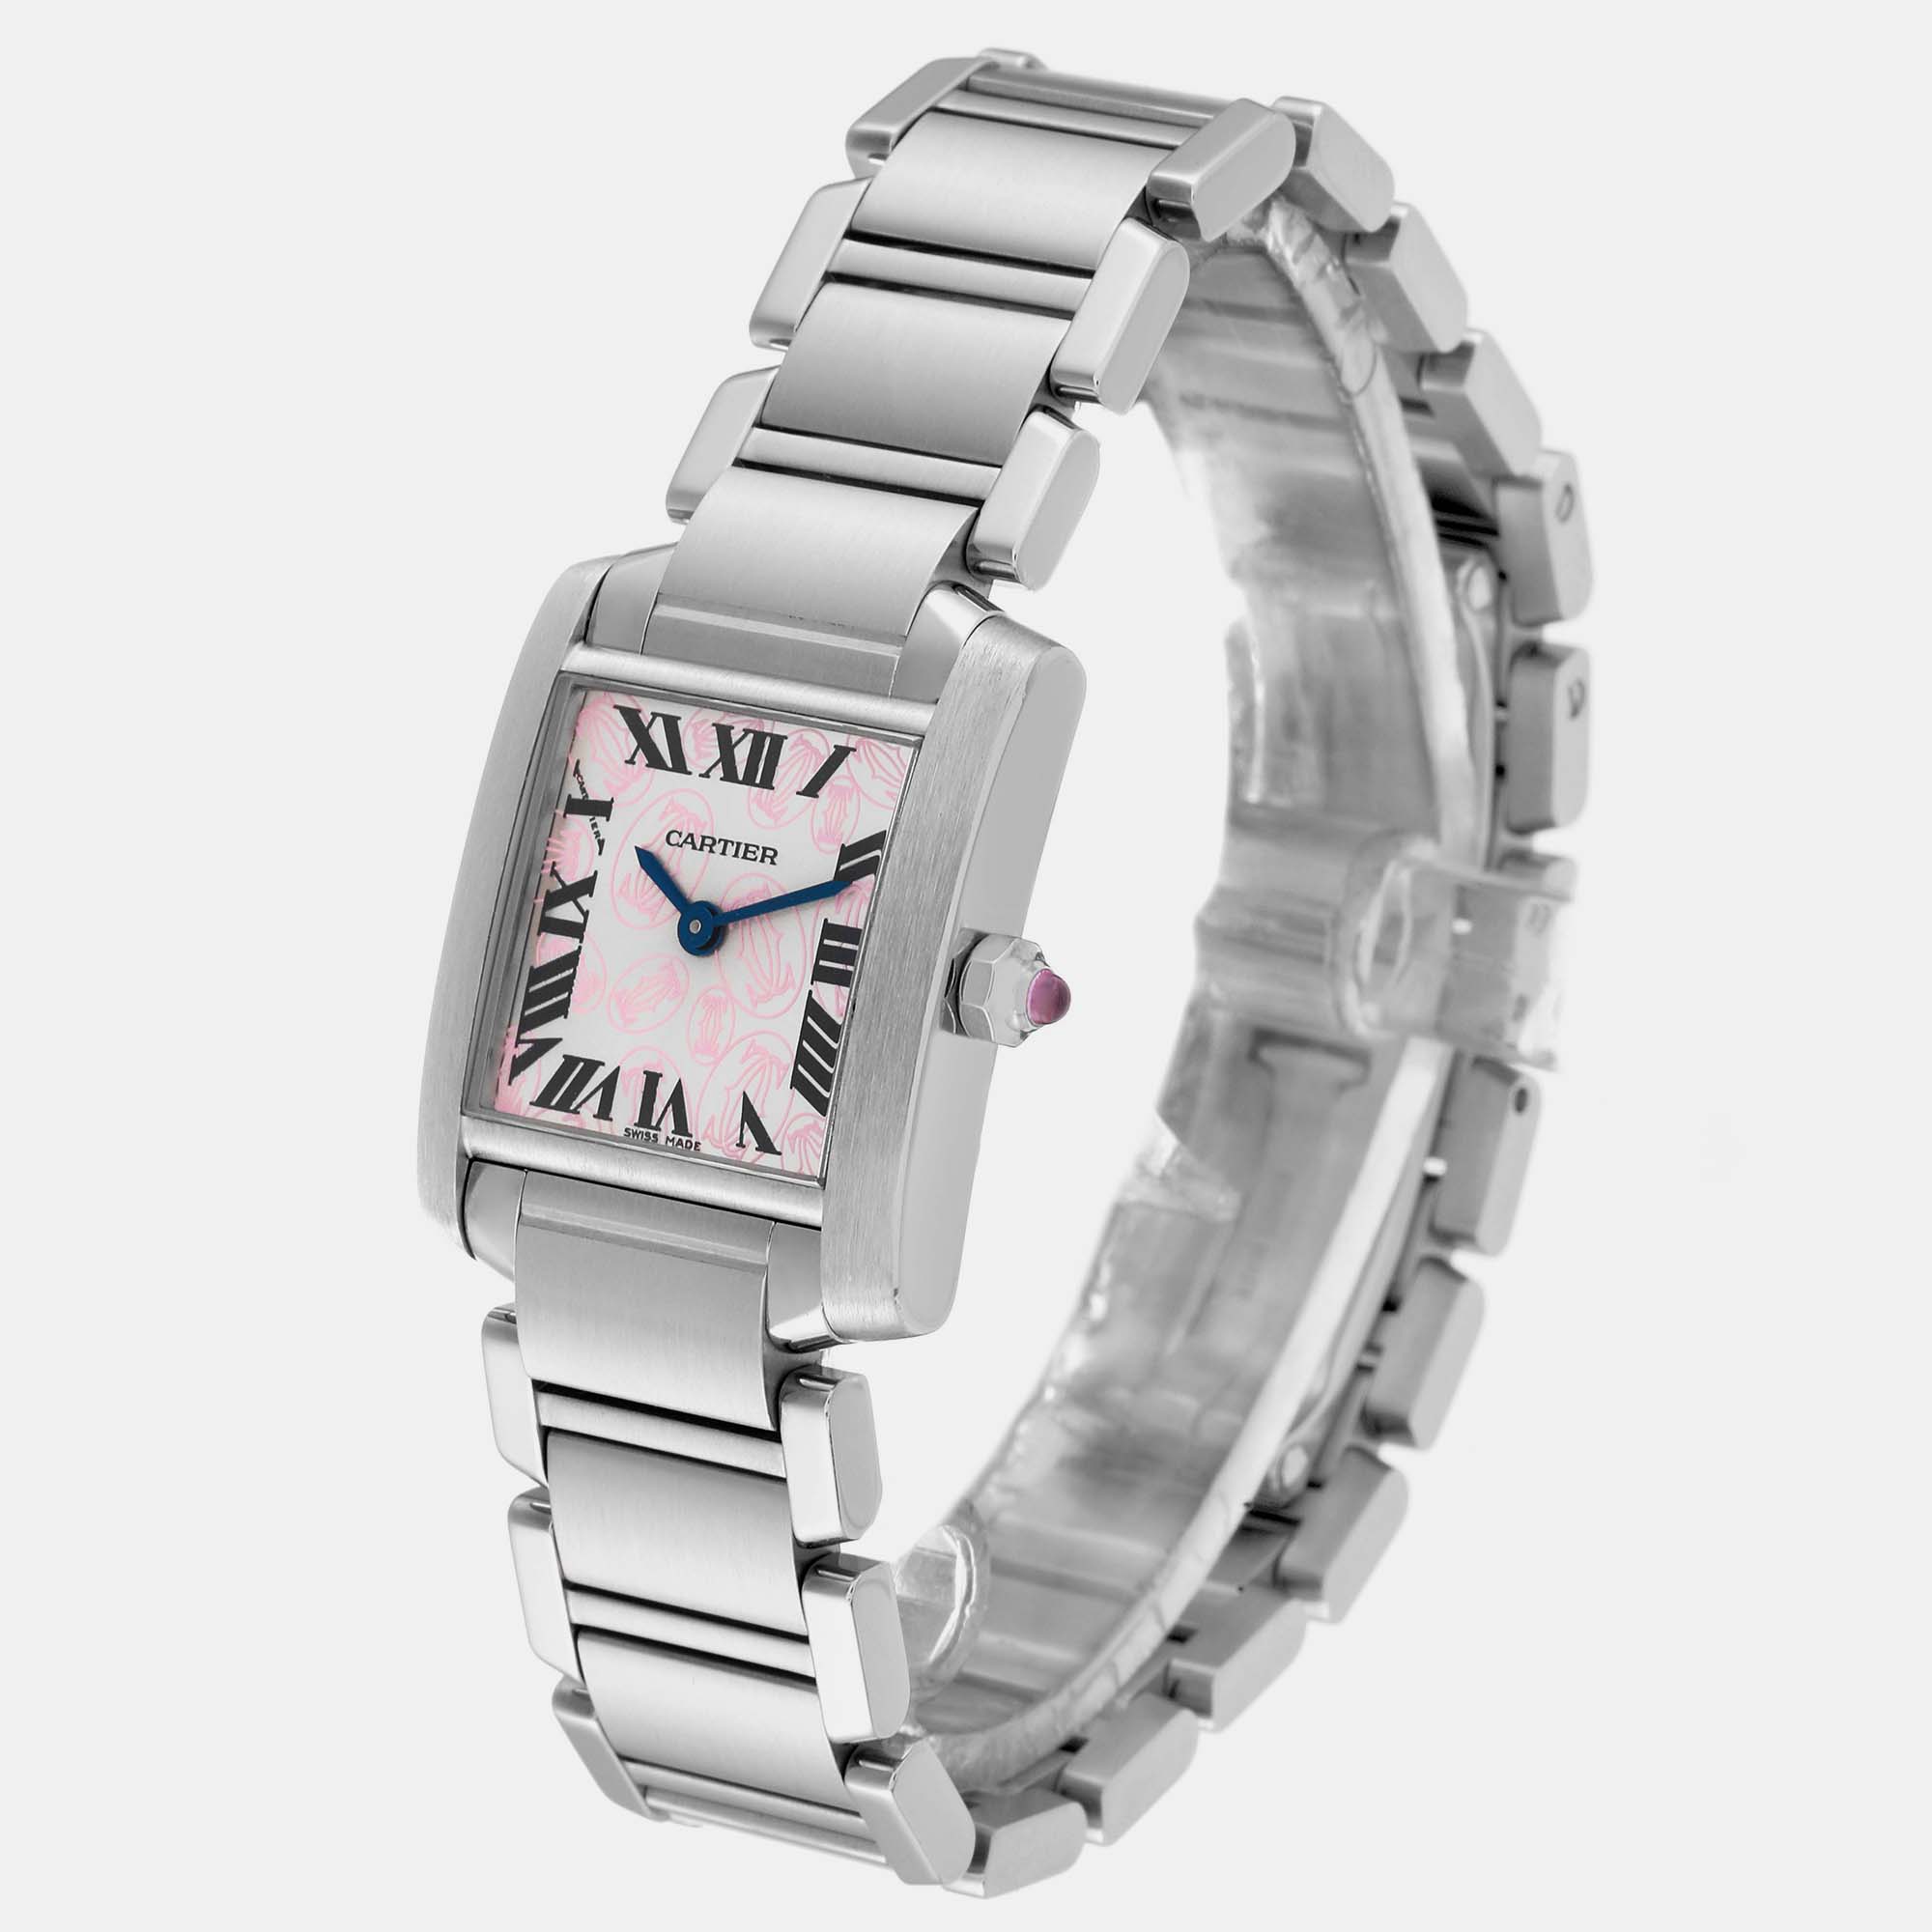 Cartier Tank Francaise Pink Double C Decor Limited Edition Steel Ladies Watch W51031Q3 20 X 25 Mm